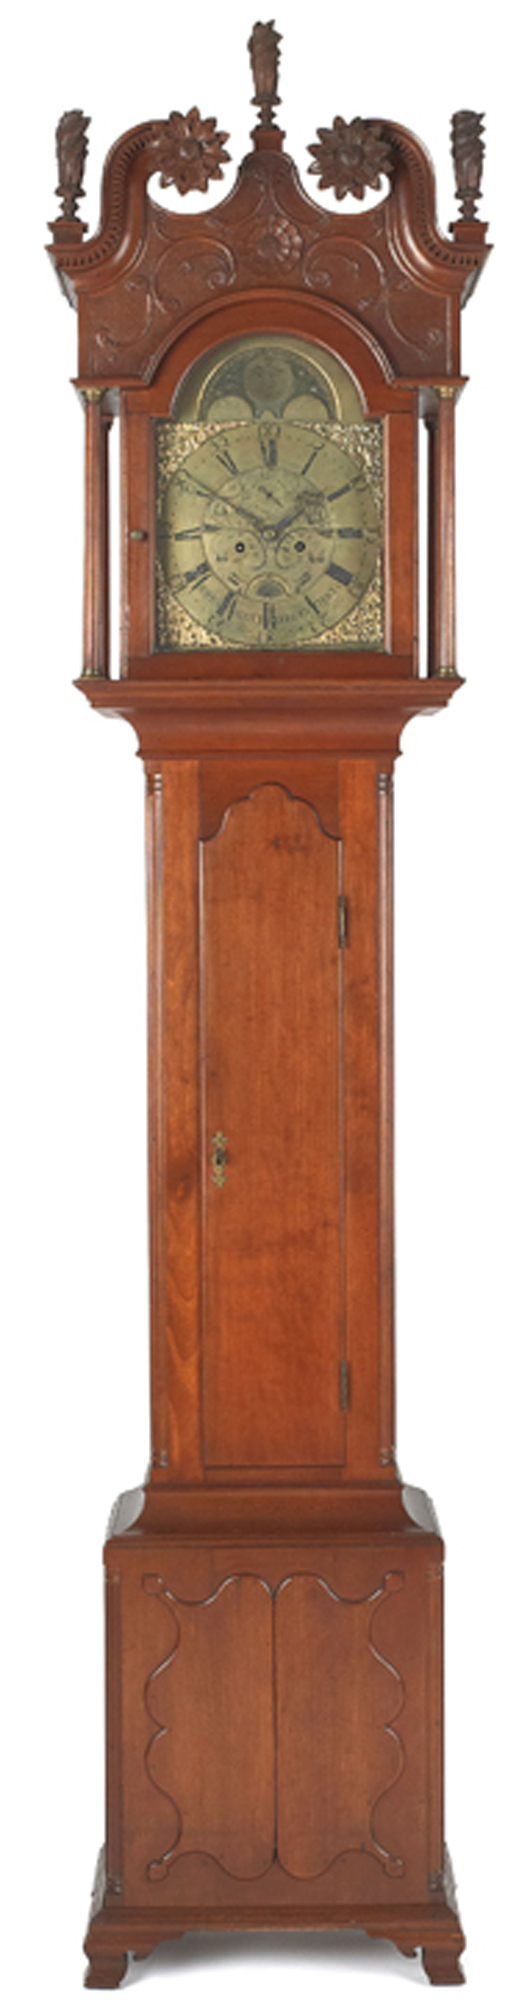 This Pennsylvania tall-case clock from the Thornton estate is one of the highlights of the sale. Estimate: $30,000-$50,000. Image courtesy Pook & Pook Inc.